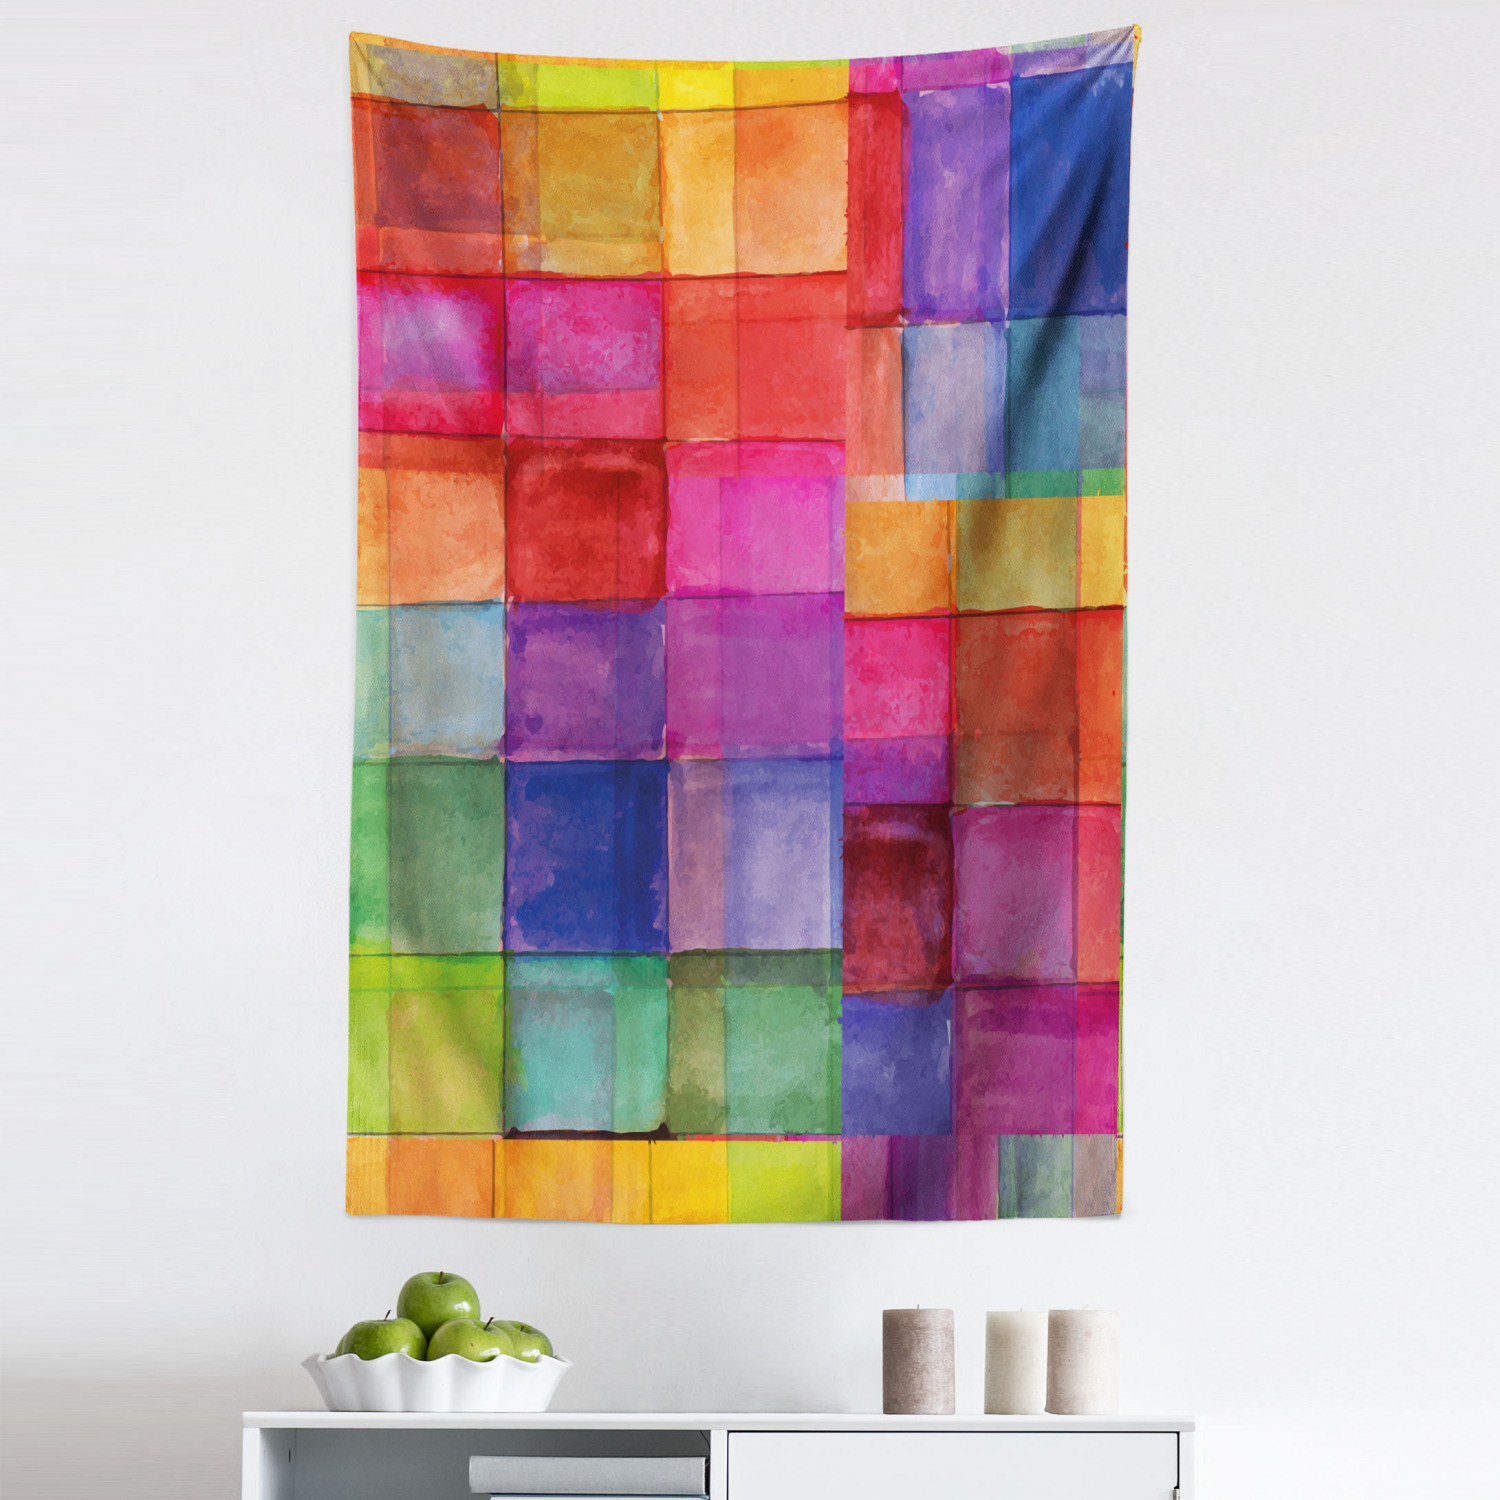 Abstract Tapestry, Rainbow Colored Geometric Square Shaped Blurry Effects  Watercolor Design, Fabric Wall Hanging Decor for Bedroom Living Room Dorm,  Sizes, Multicolor, by Ambesonne